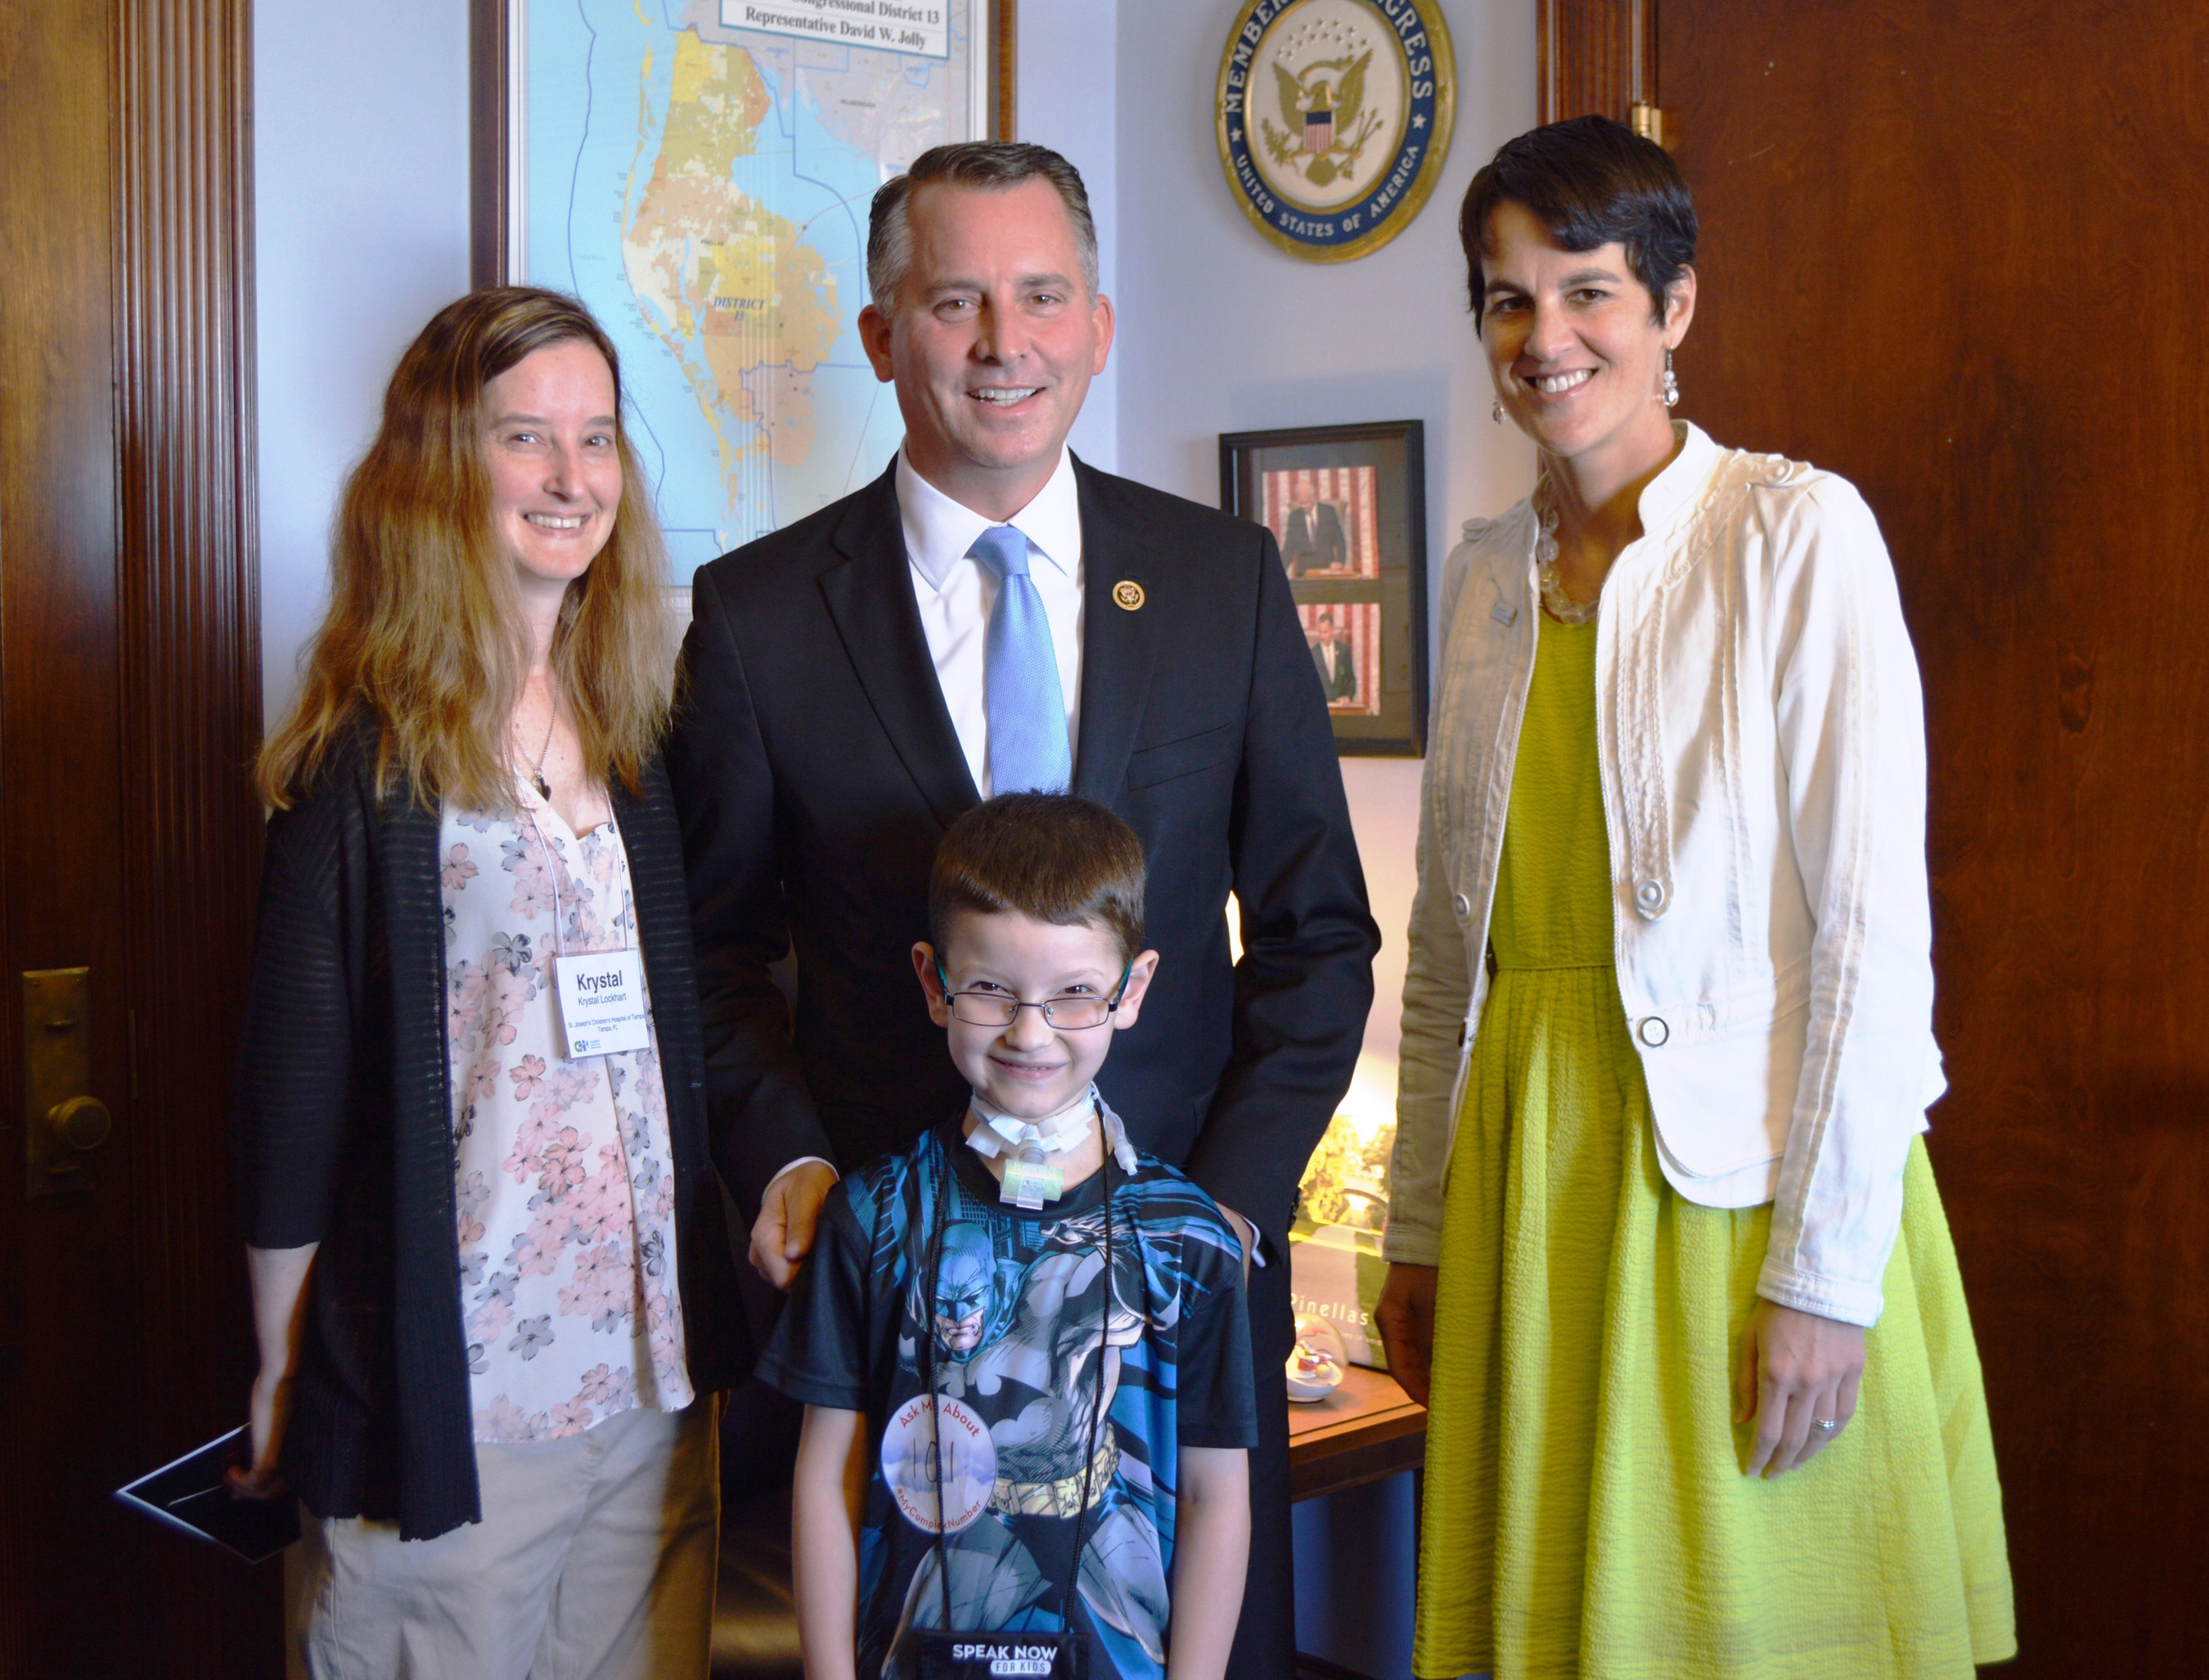 Six-year-old Lakota Lockhart, a patient at St. Joseph's Children's Hospital in Tampa, Krystal Lockhart and Keri Eisenbeis, director of Government Relations for BayCare Health System, meet with Congressman David Jolly on Capitol Hill June 22, 2016, to discuss health care legislation for medically complex children.